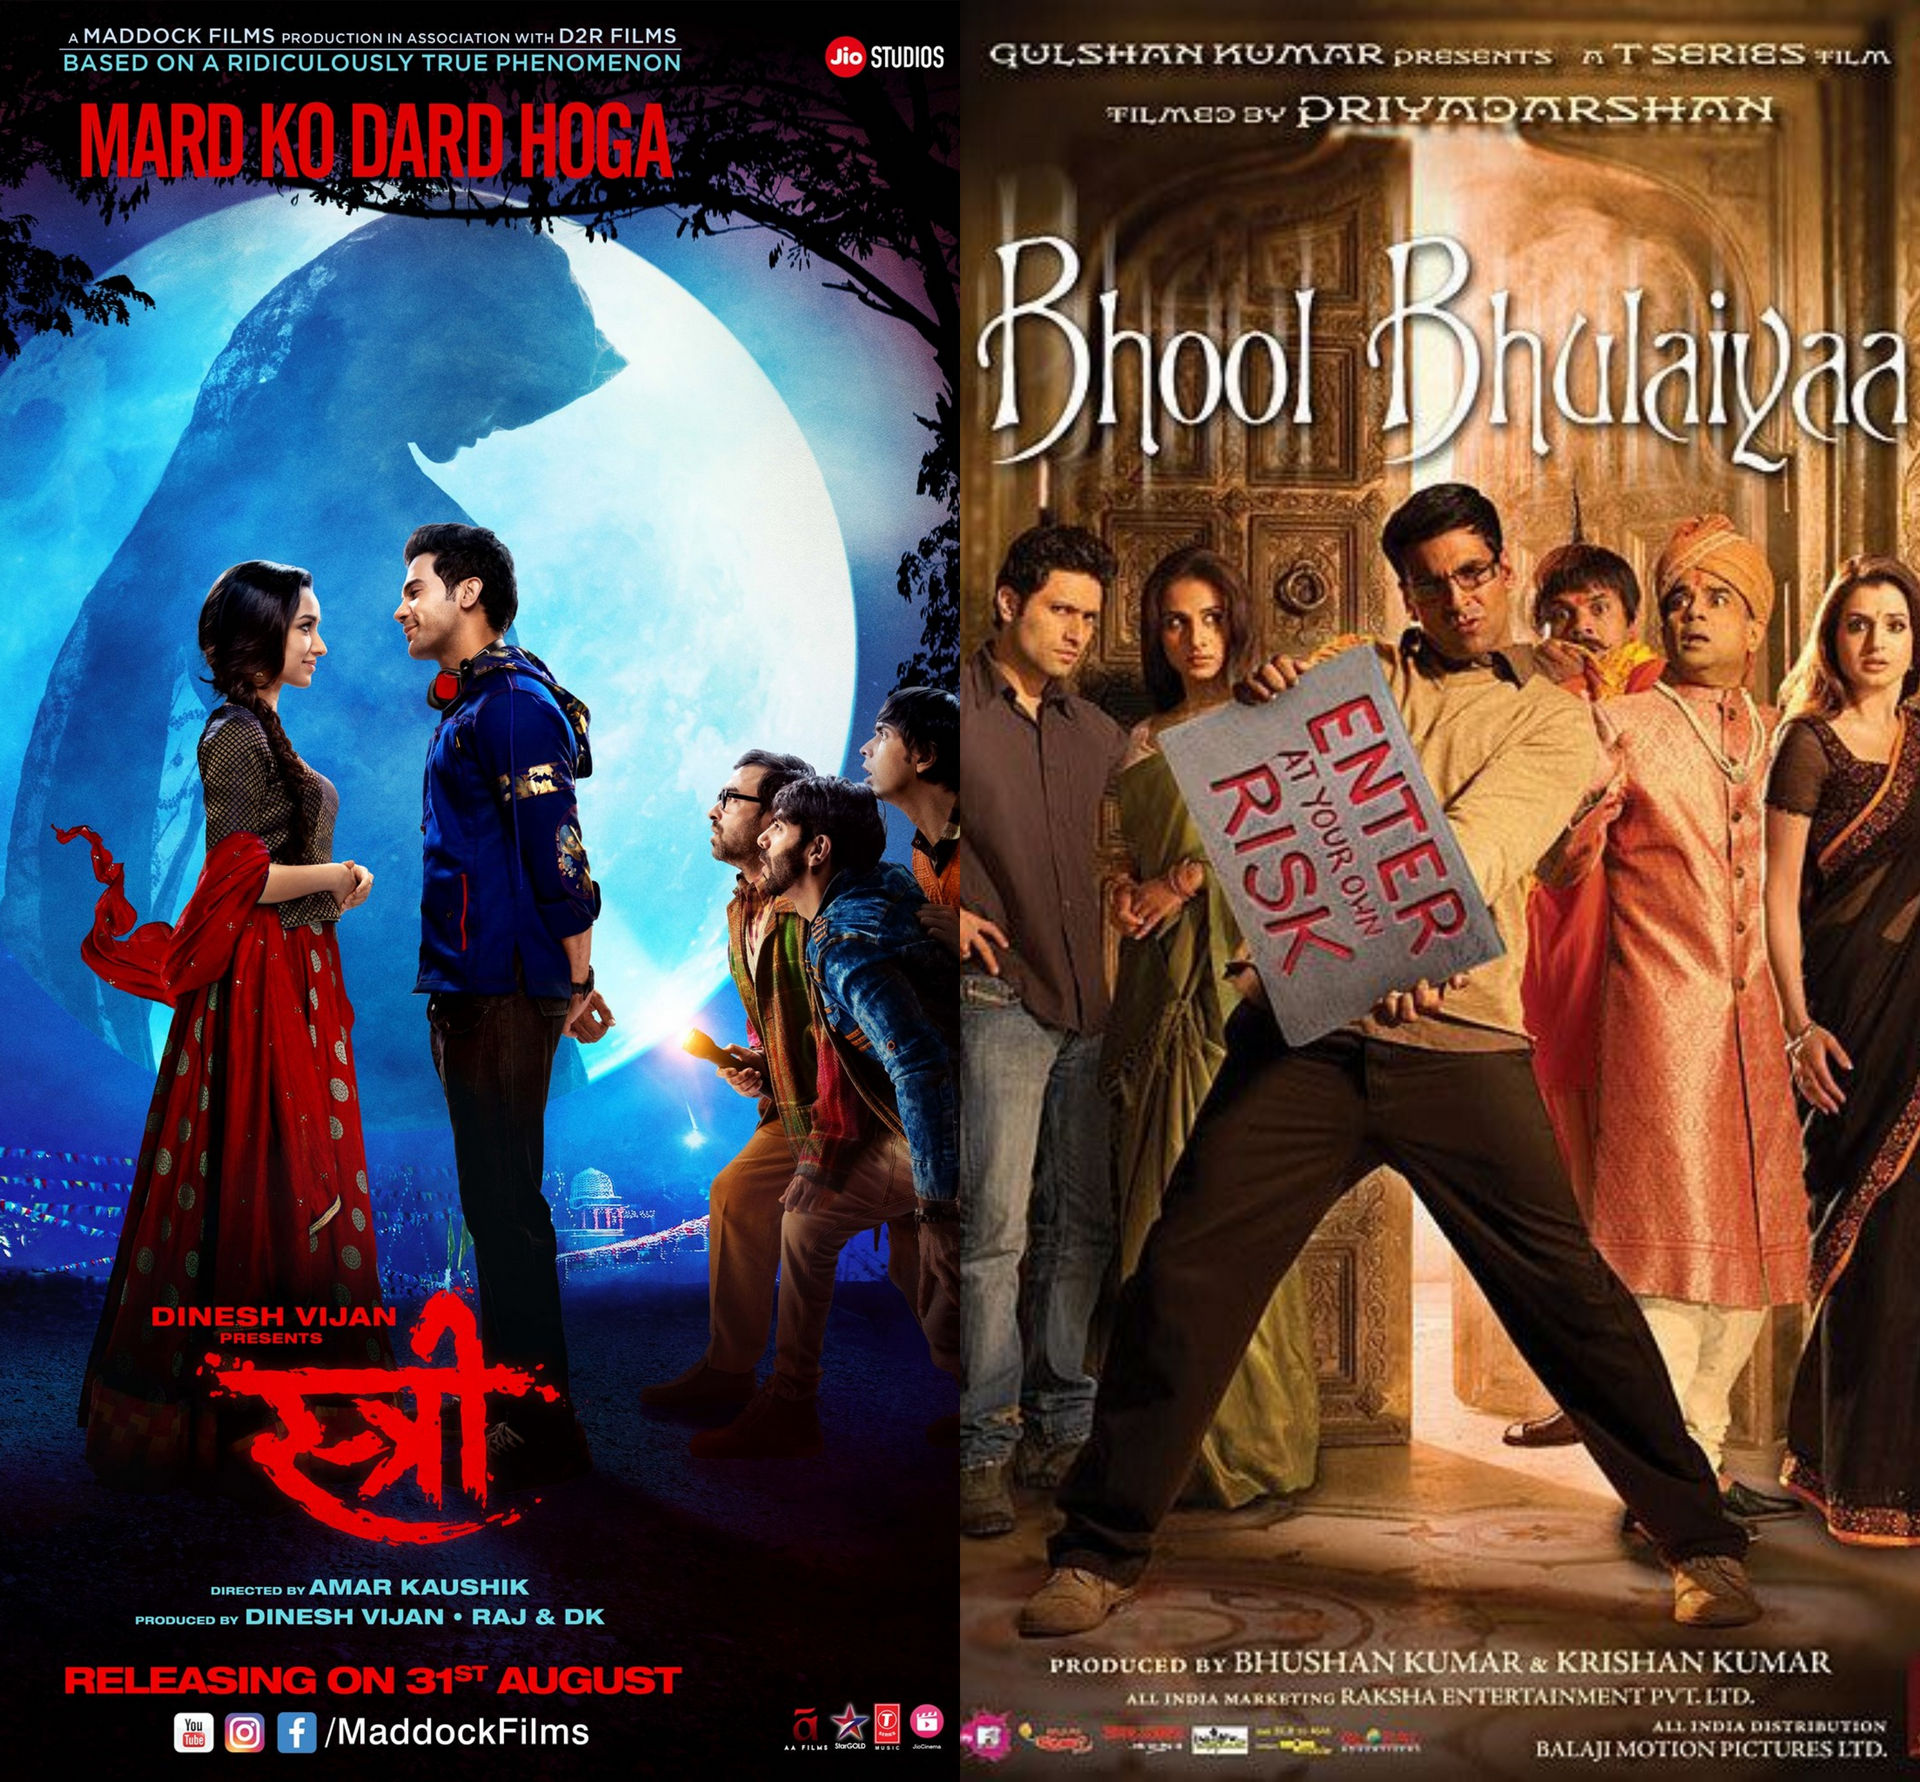 5 Bollywood Horror Movies You Can Watch on Halloween for a Spooky Good